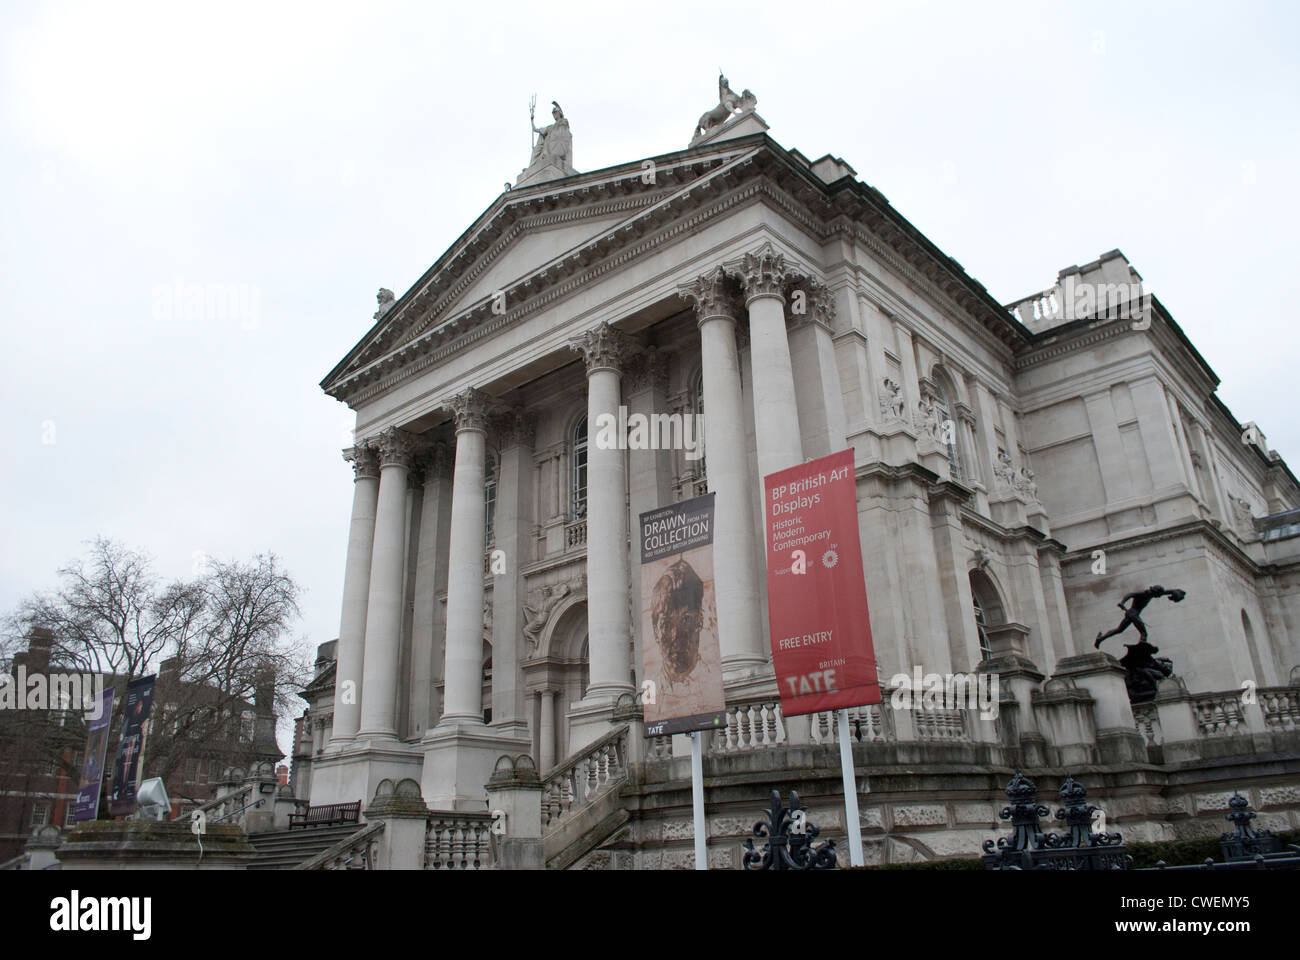 The front of Tate Britain art gallery Stock Photo